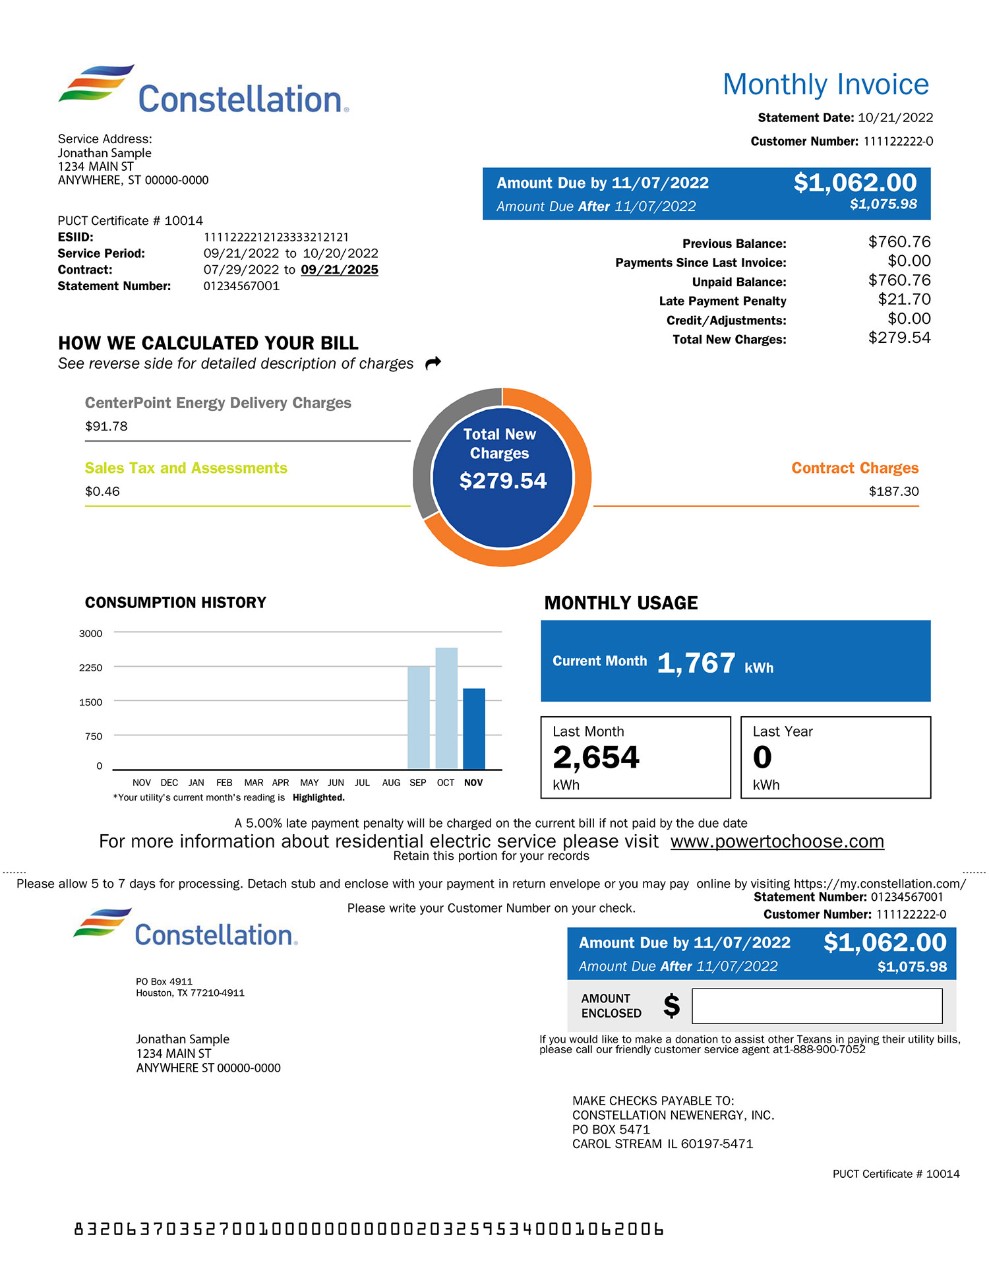 Sample electricity bill from Constellation